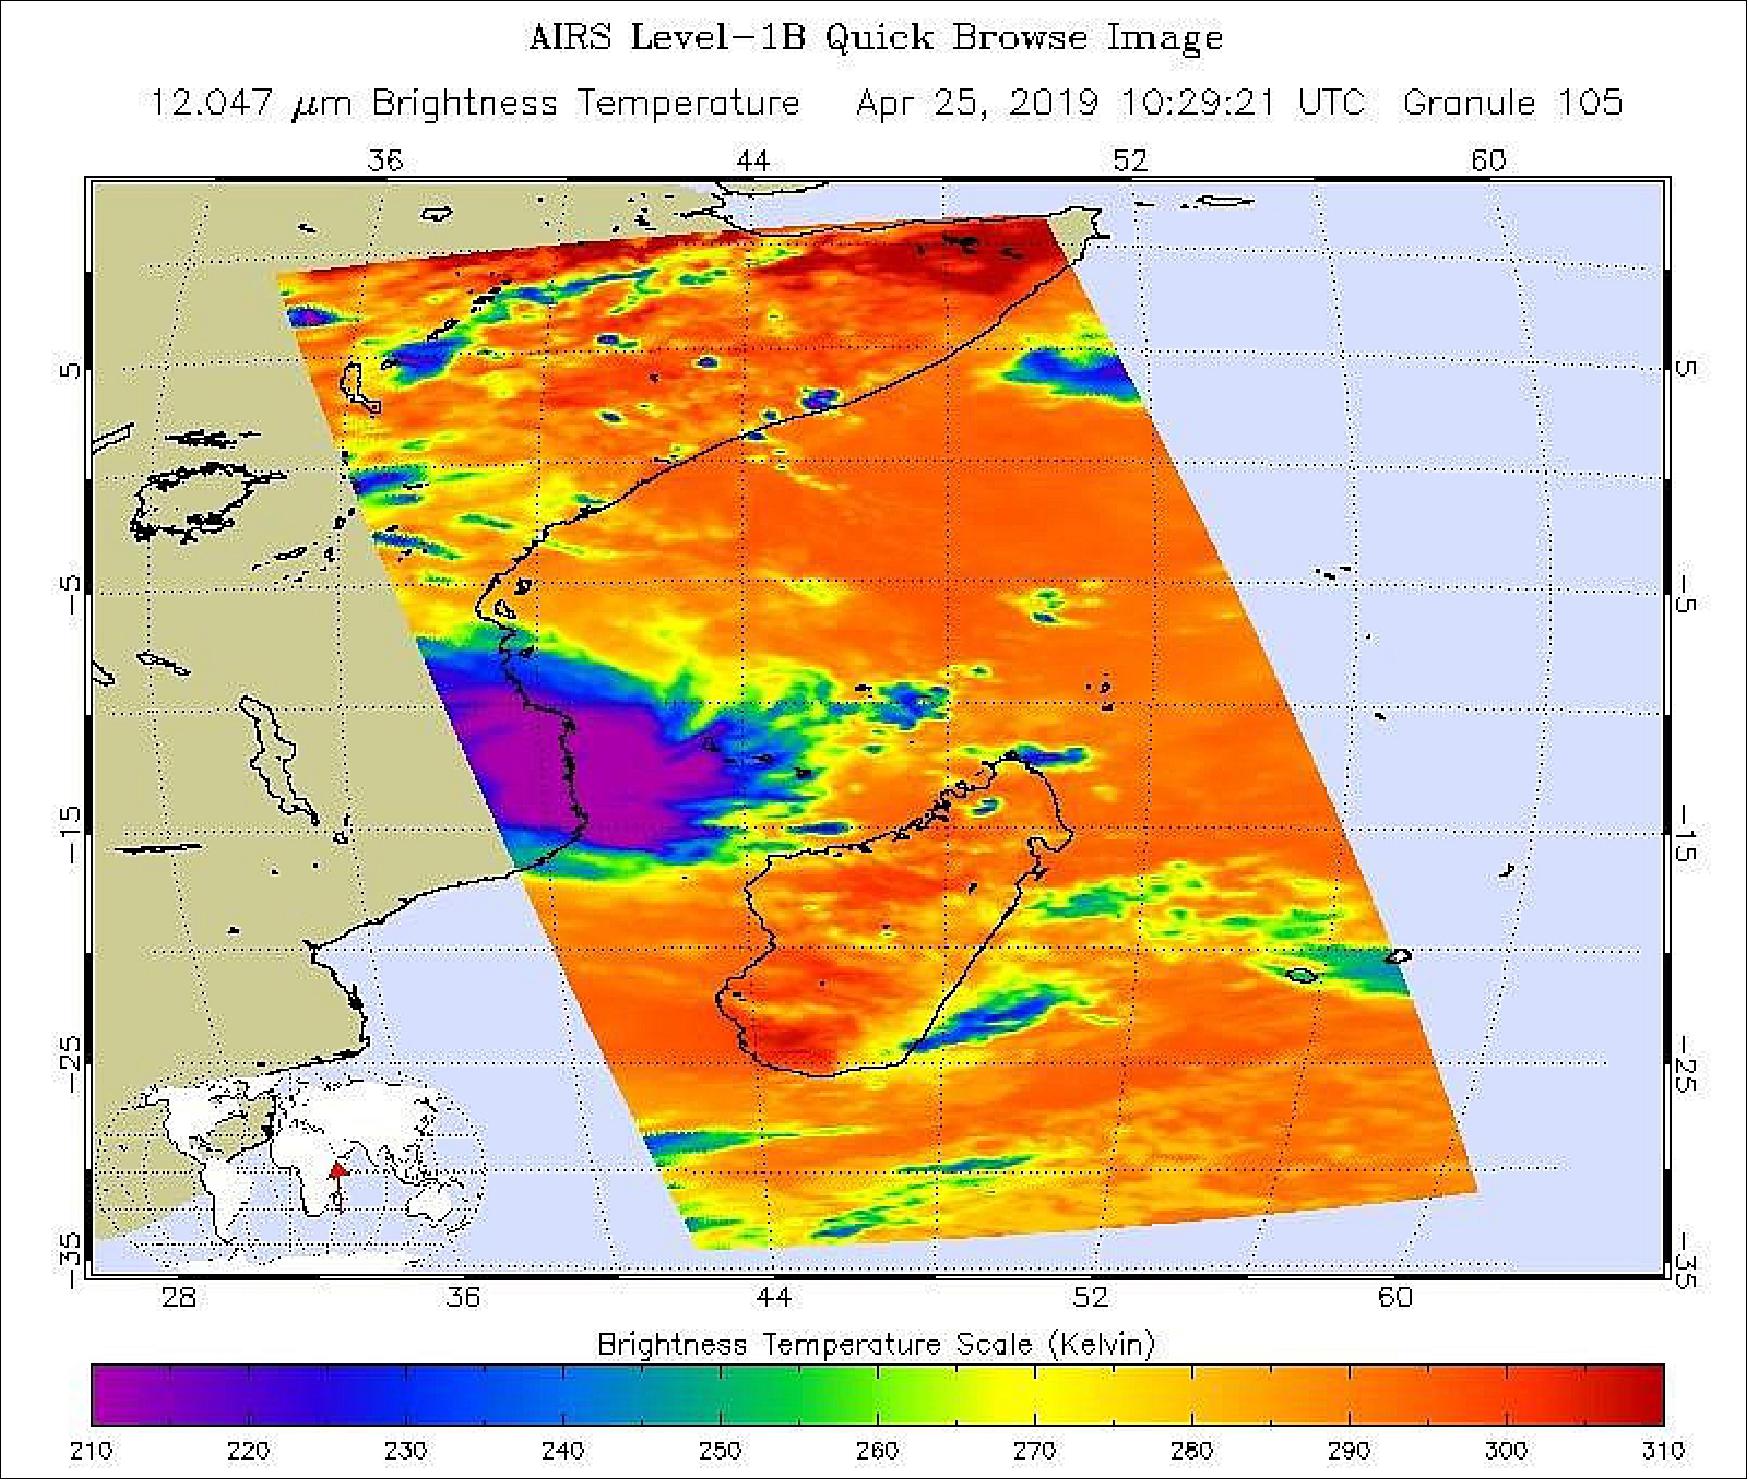 Figure 36: This infrared image from NASA's AIRS (Atmospheric Infrared Sounder) shows the temperature of clouds or the surface in and around Tropical Cyclone Kenneth as it was about to make landfall in northern Mozambique on Thursday, 25 April. The large purple area indicates very cold clouds carried high into the atmosphere by deep thunderstorms. These storm clouds are associated with heavy rainfall. The orange areas are mostly cloud-free areas, with the clear air caused by air motion outward from the cold clouds near the storm center then downward into the surrounding areas (image credit: NASA/JPL-Caltech)